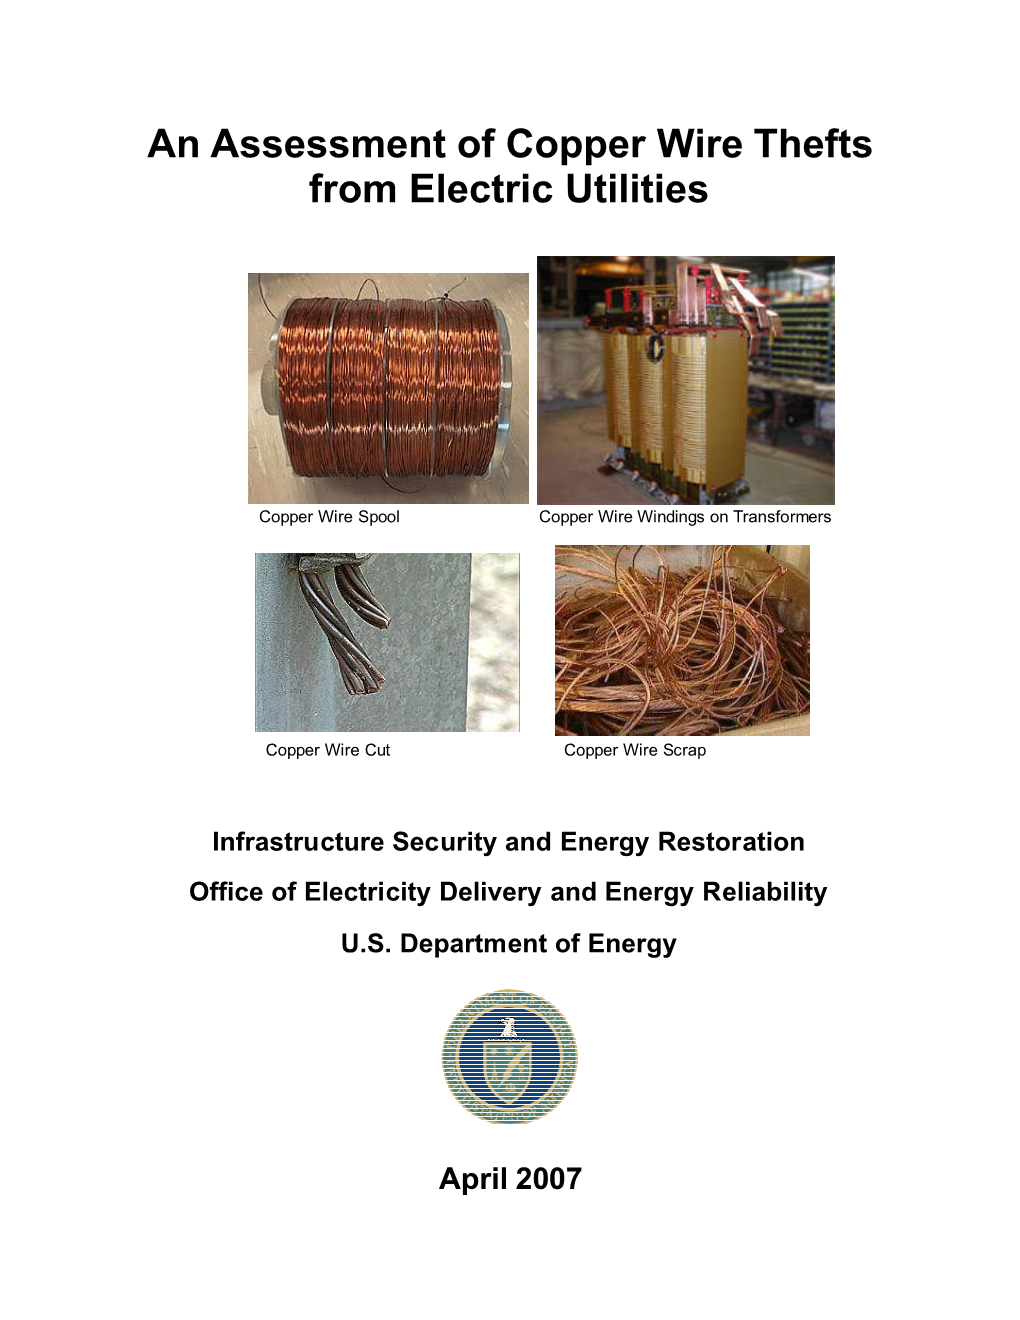 An Assessment of Copper Wire Thefts from Electric Utilities